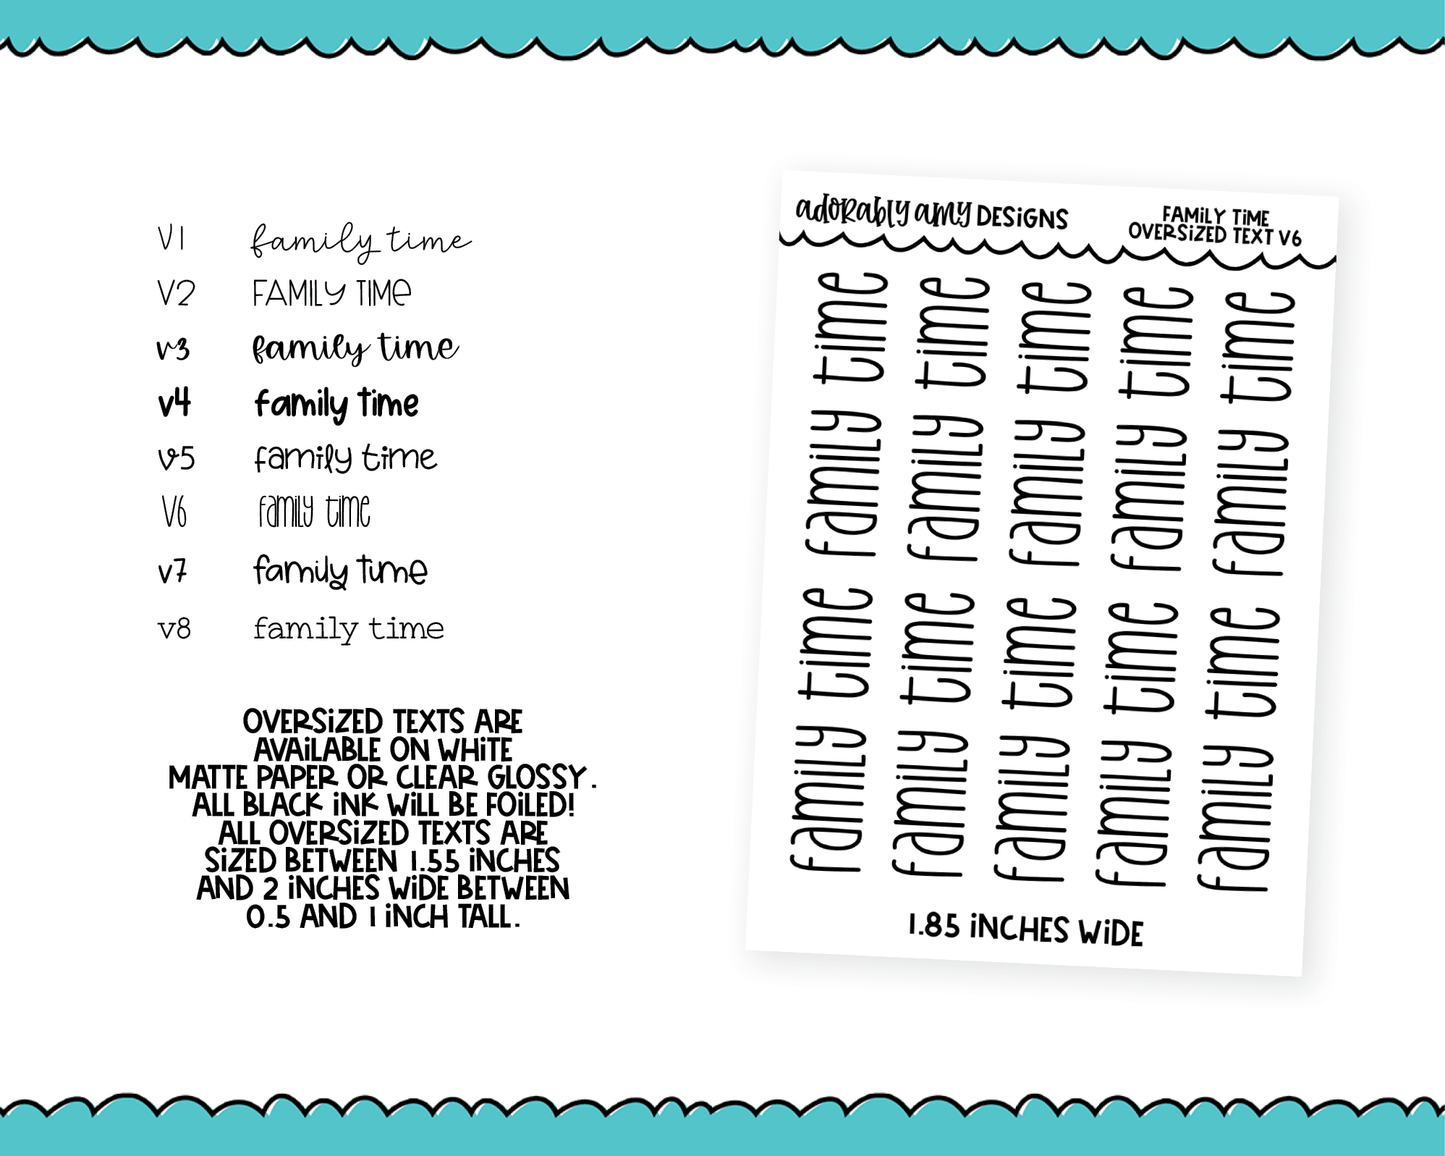 Foiled Oversized Text - Family Time Large Text Planner Stickers